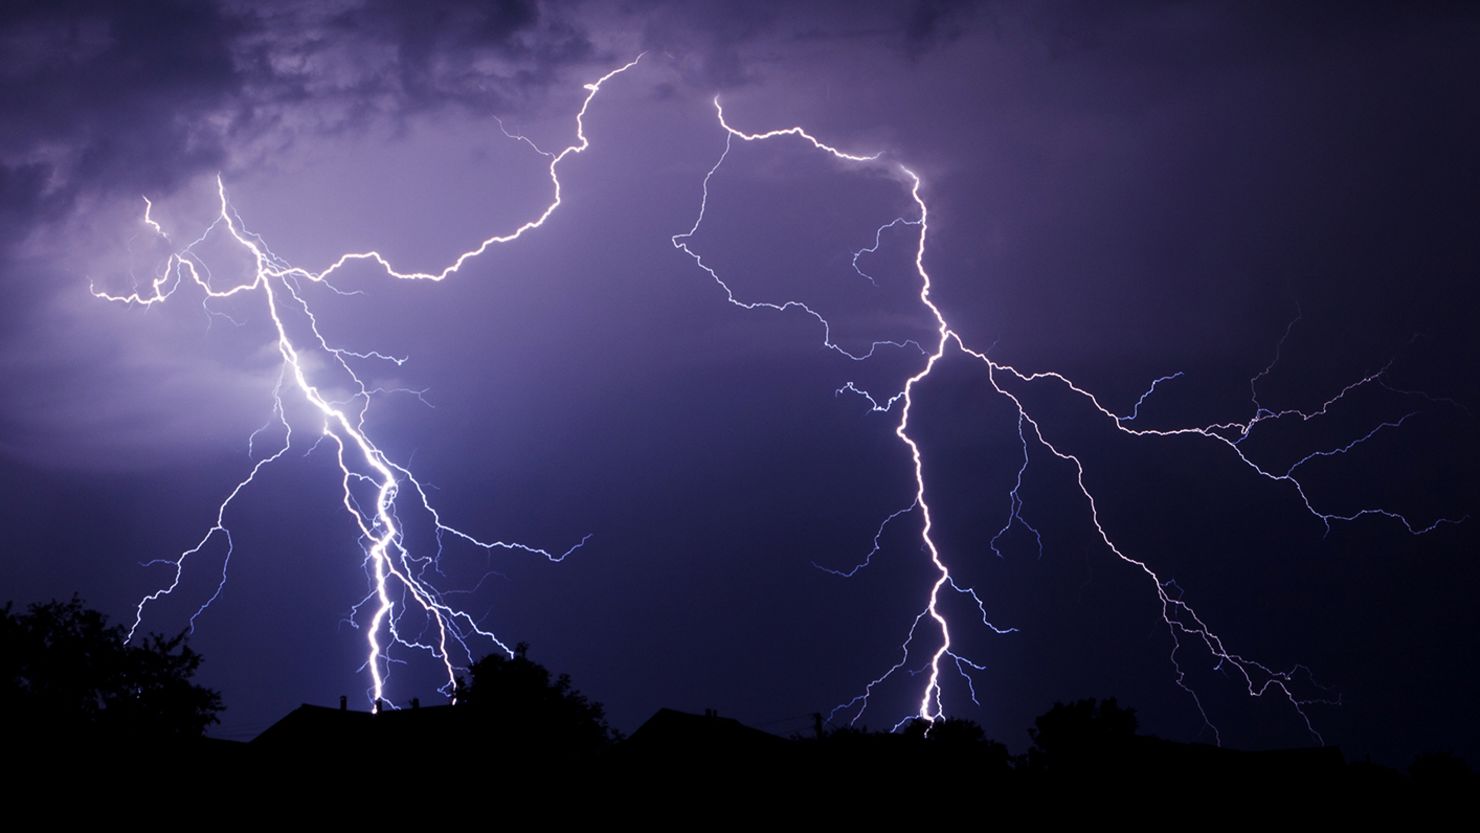 Although the vast majority of lightning strike victims survive, the effects can be serious and long-lasting.